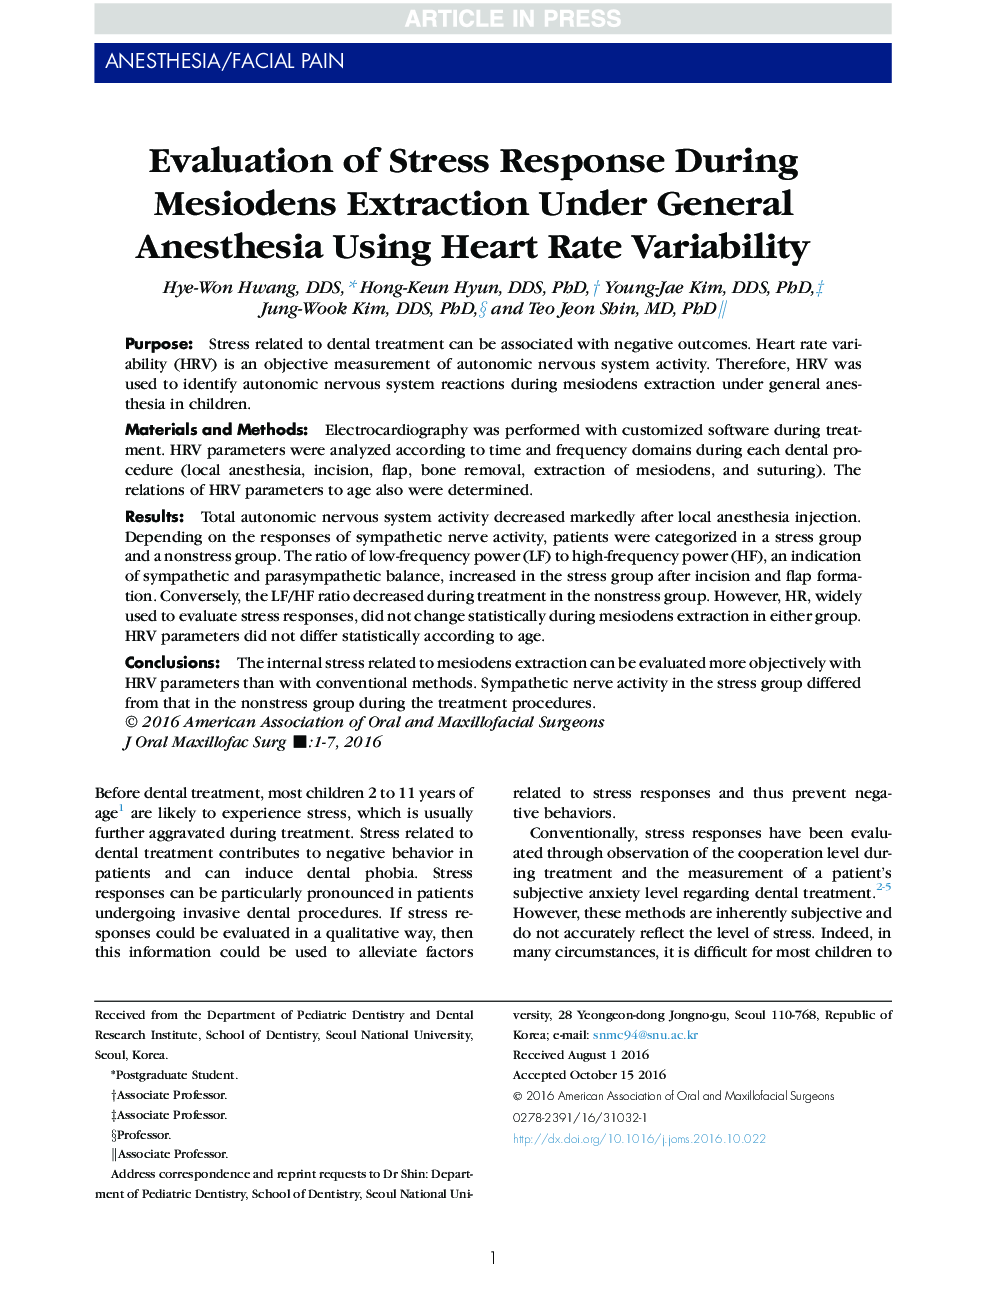 Evaluation of Stress Response During Mesiodens Extraction Under General Anesthesia Using Heart Rate Variability